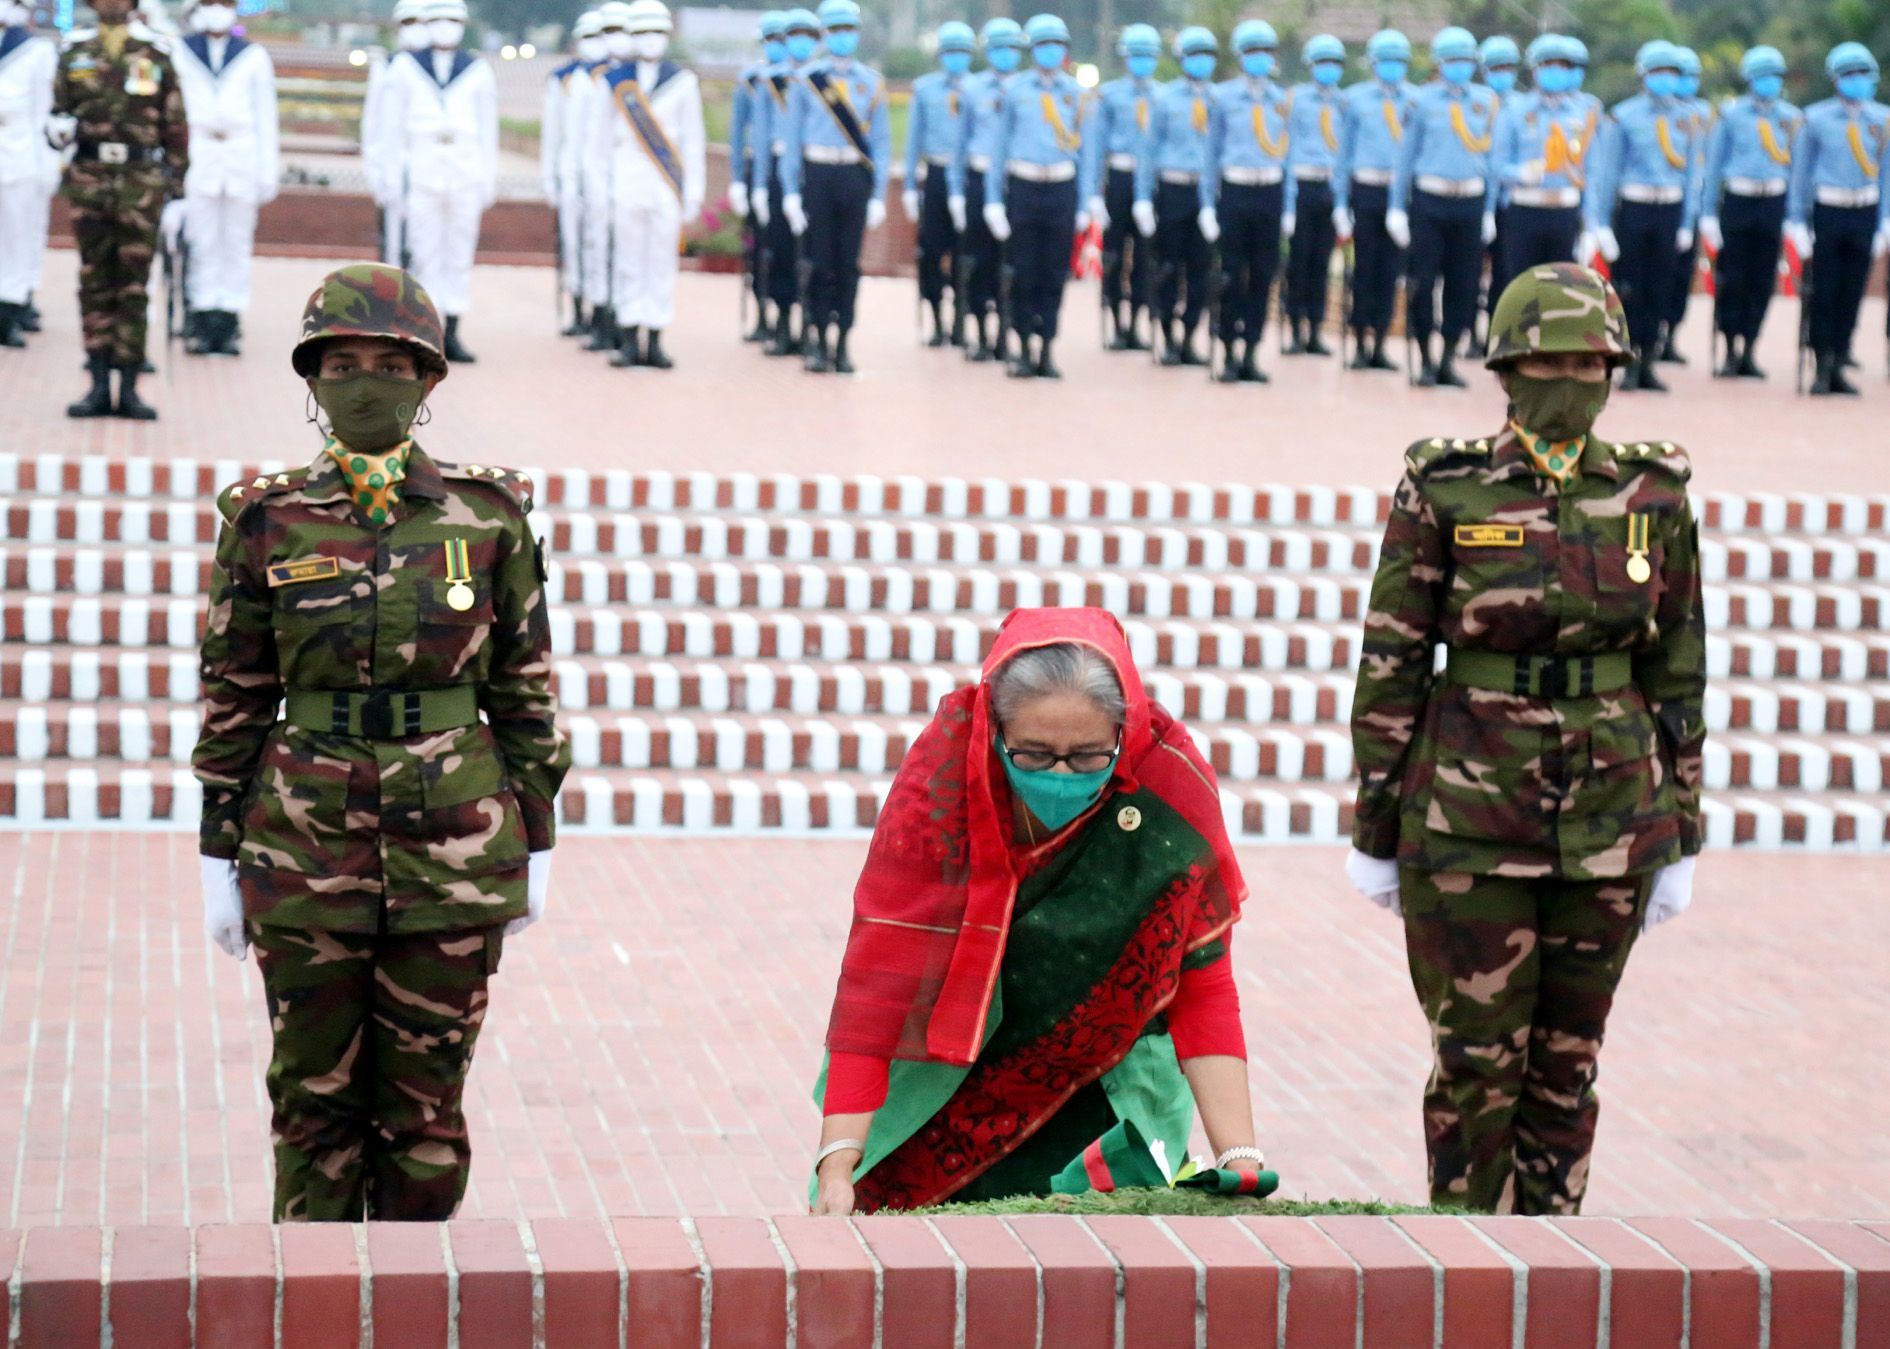 Prime Minister Sheikh Hasina paid rich tributes to the Liberation War martyrs by placing wreaths at the National Memorial.